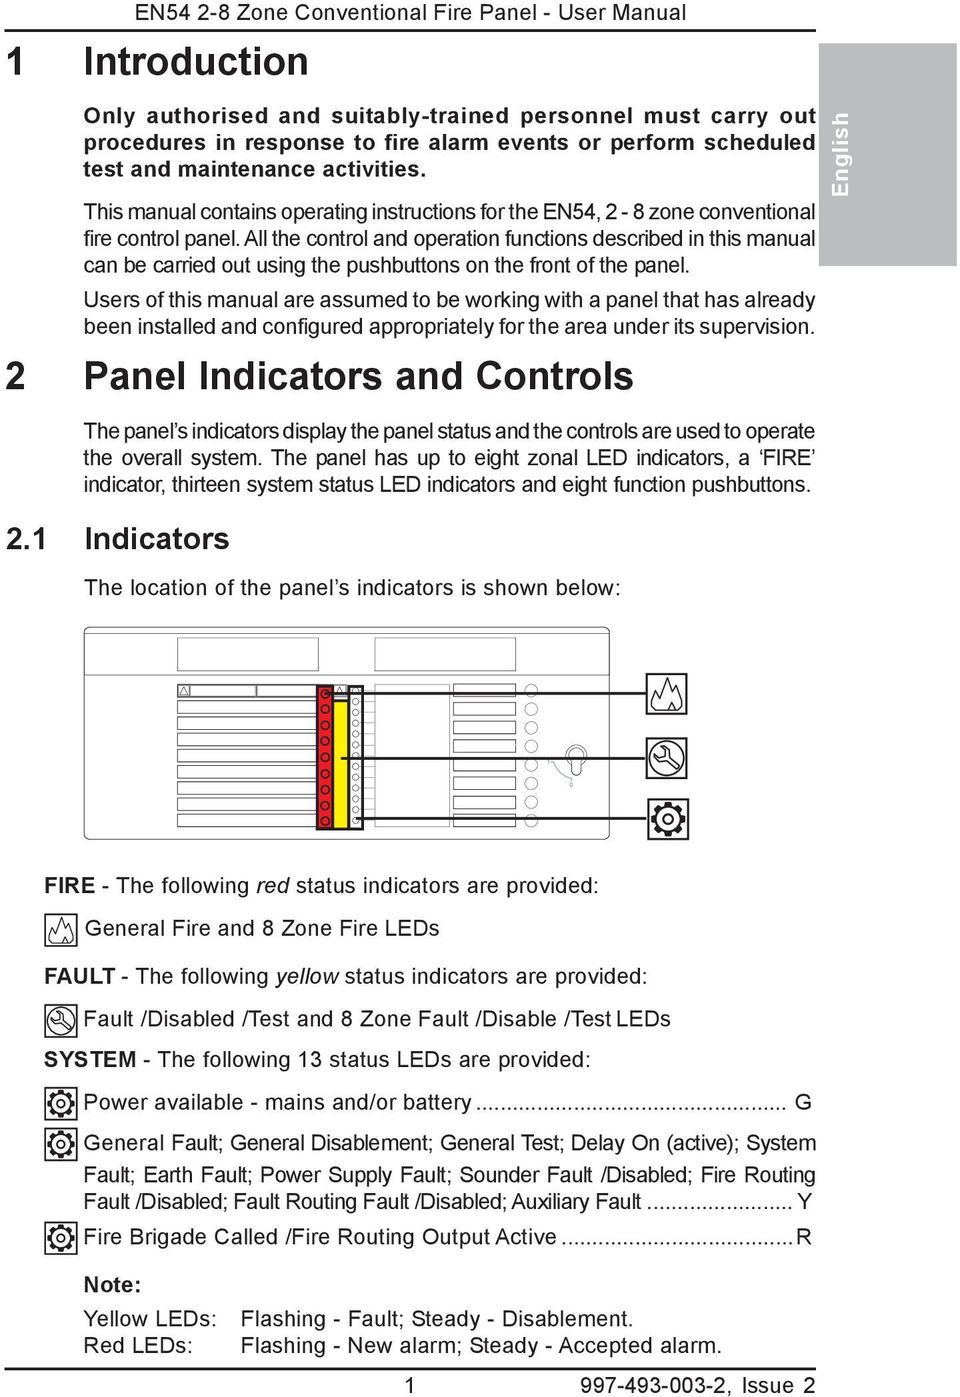 All the control and operation functions described in this manual can be carried out using the pushbuttons on the front of the panel.